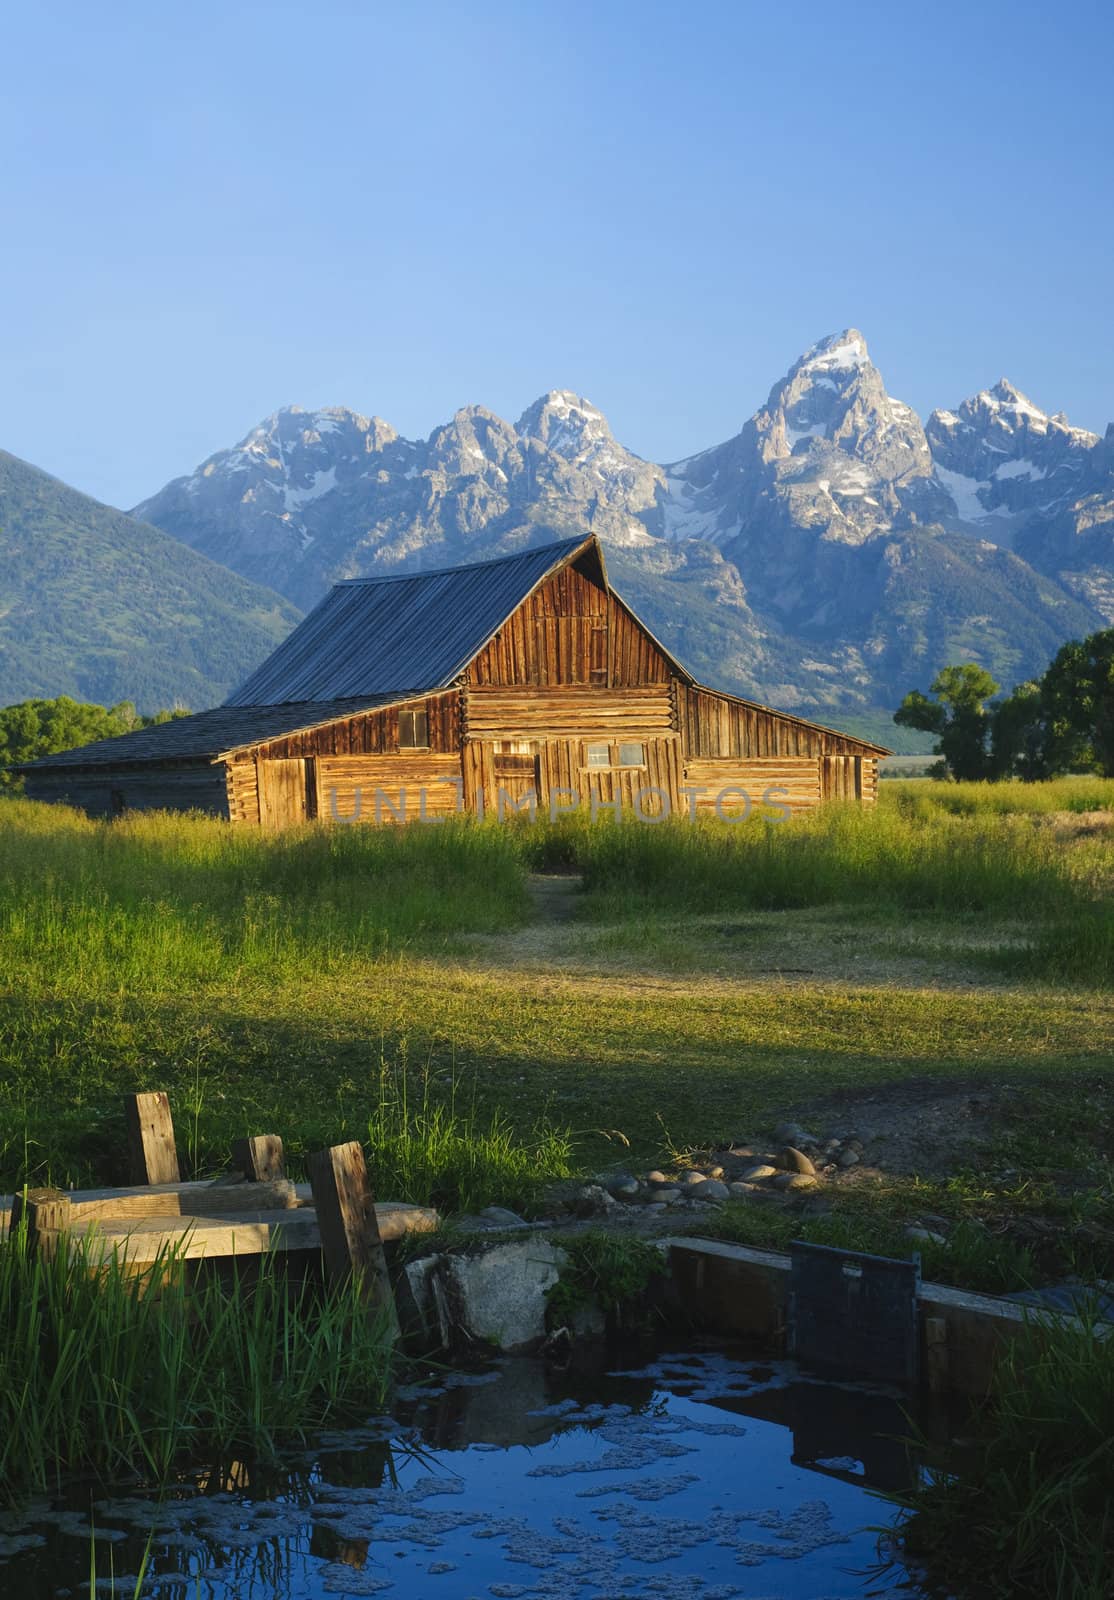 Iconic Mormon barn in the Teoton National park, Wyoming